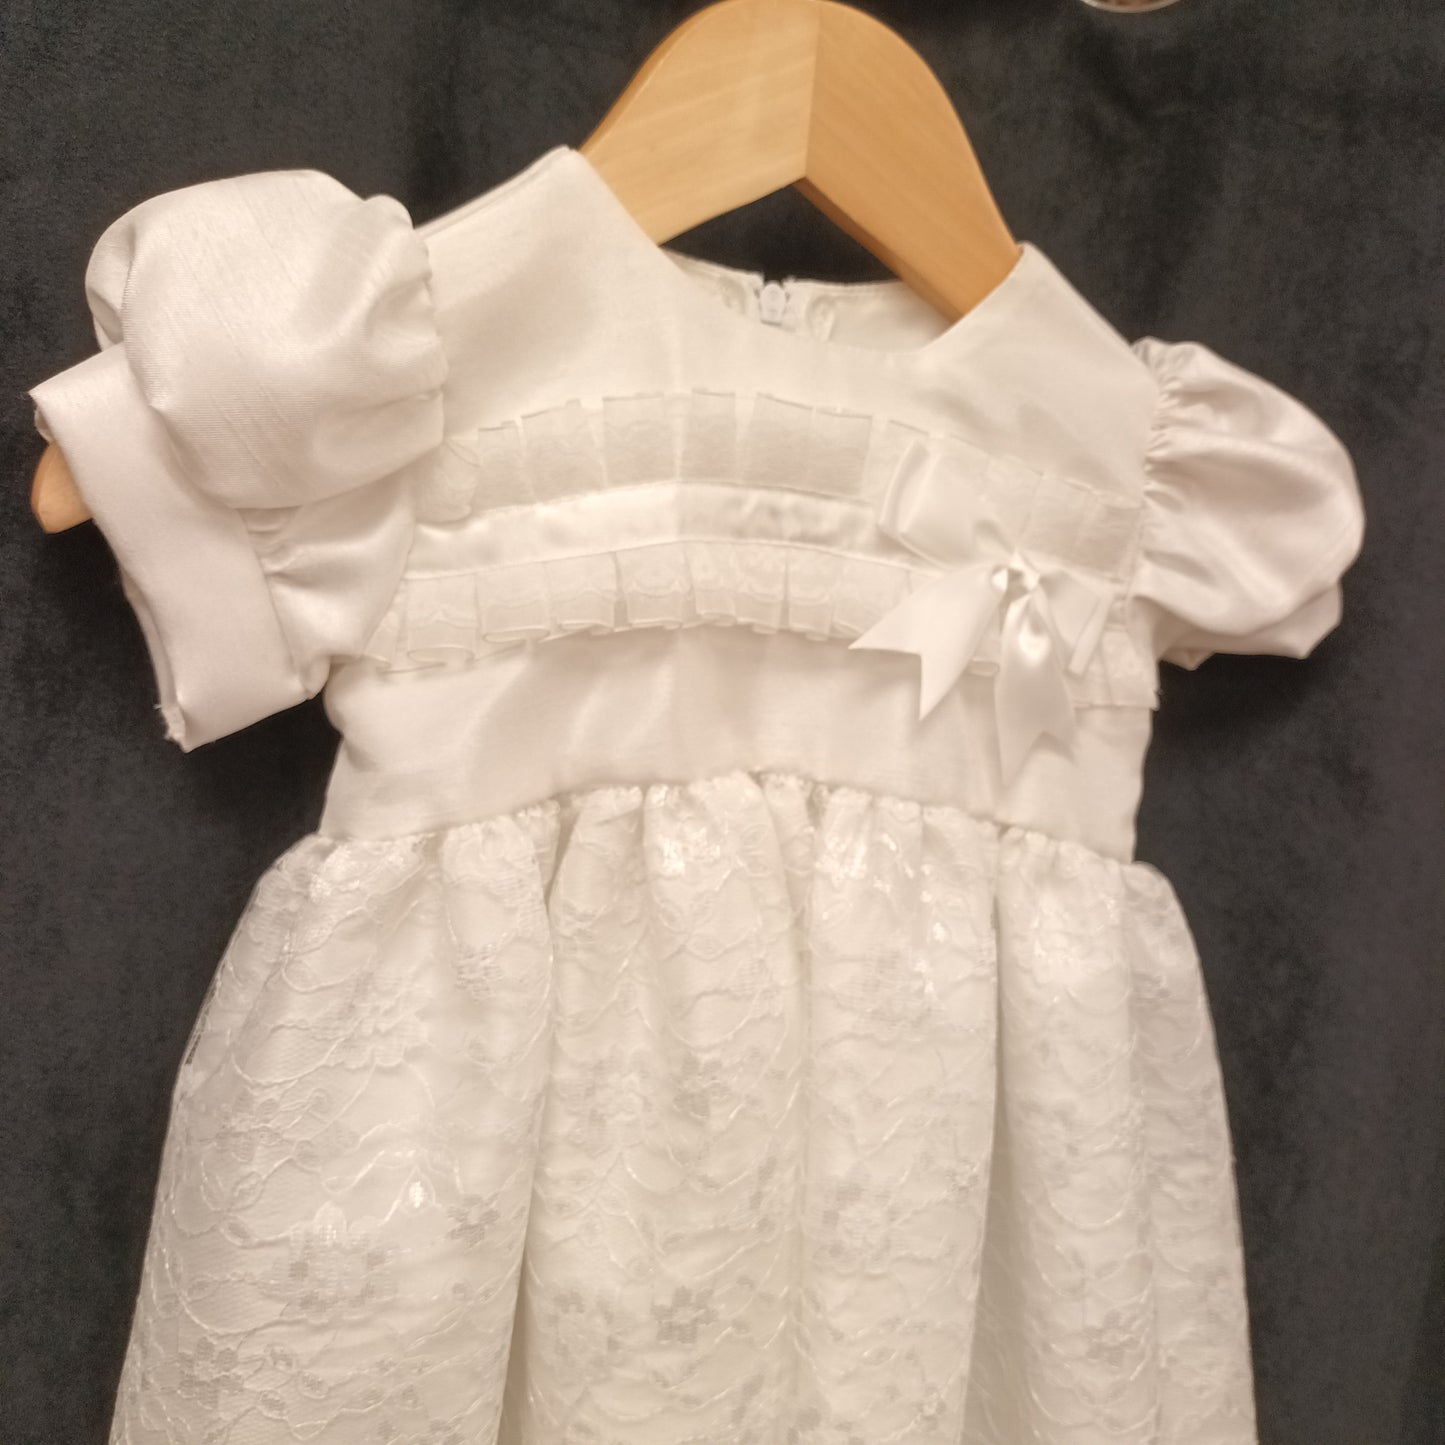 Christening Gown Dress White Lace & Bow Detail 0 - 6 Months